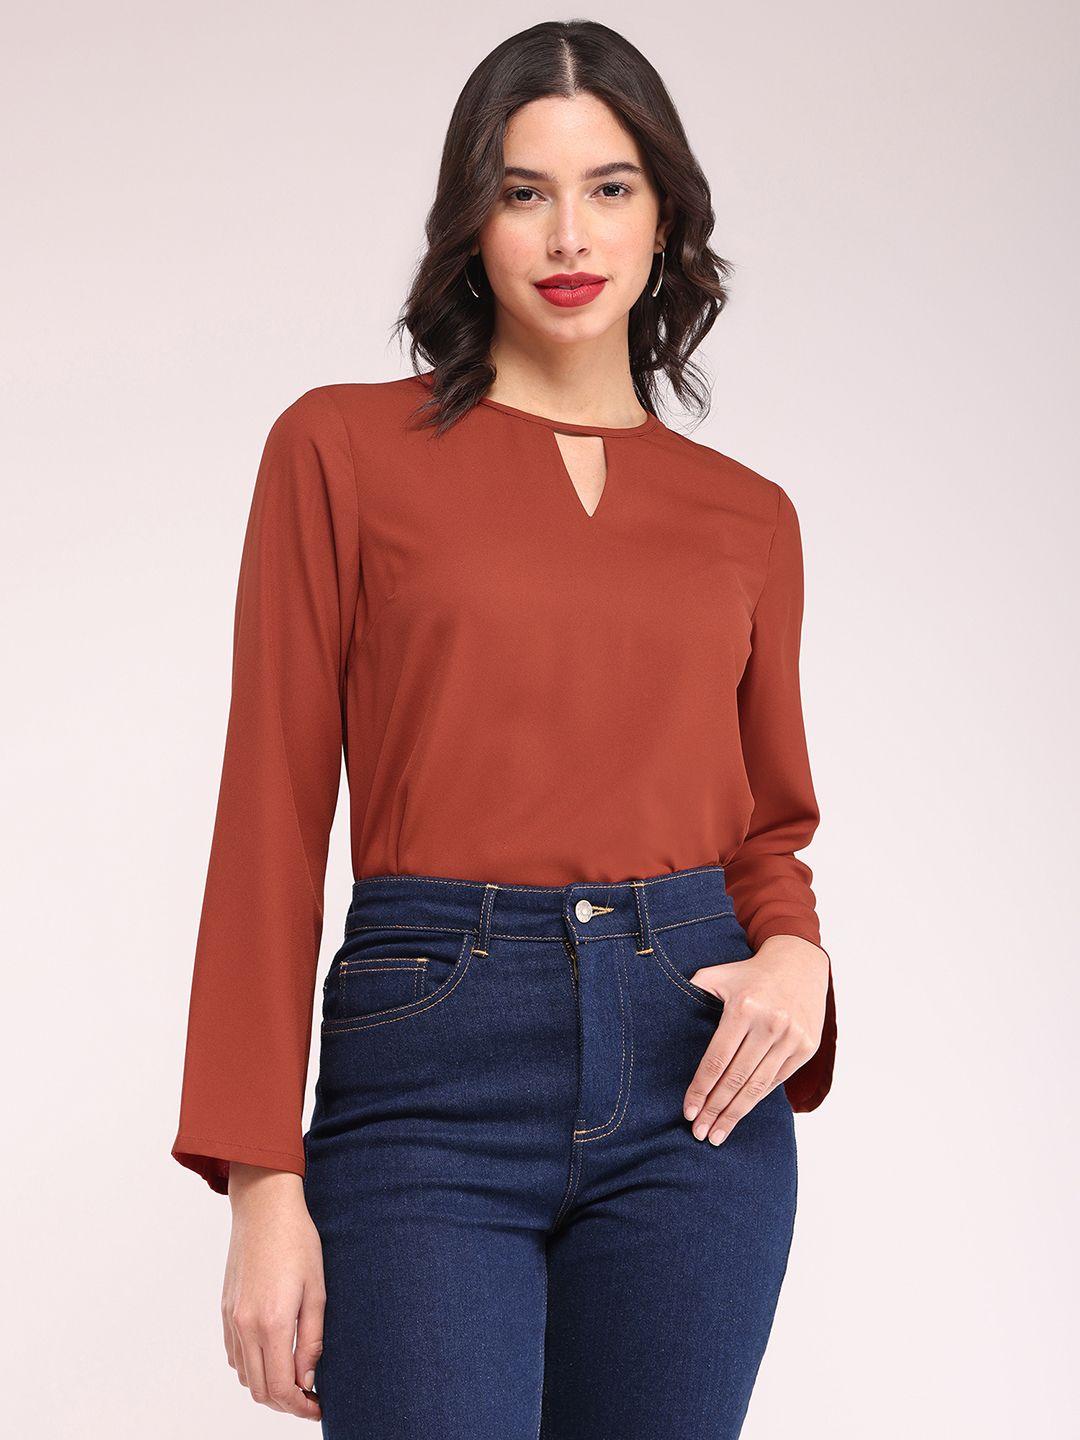 fablestreet keyhole neck long sleeves flared sleeve top